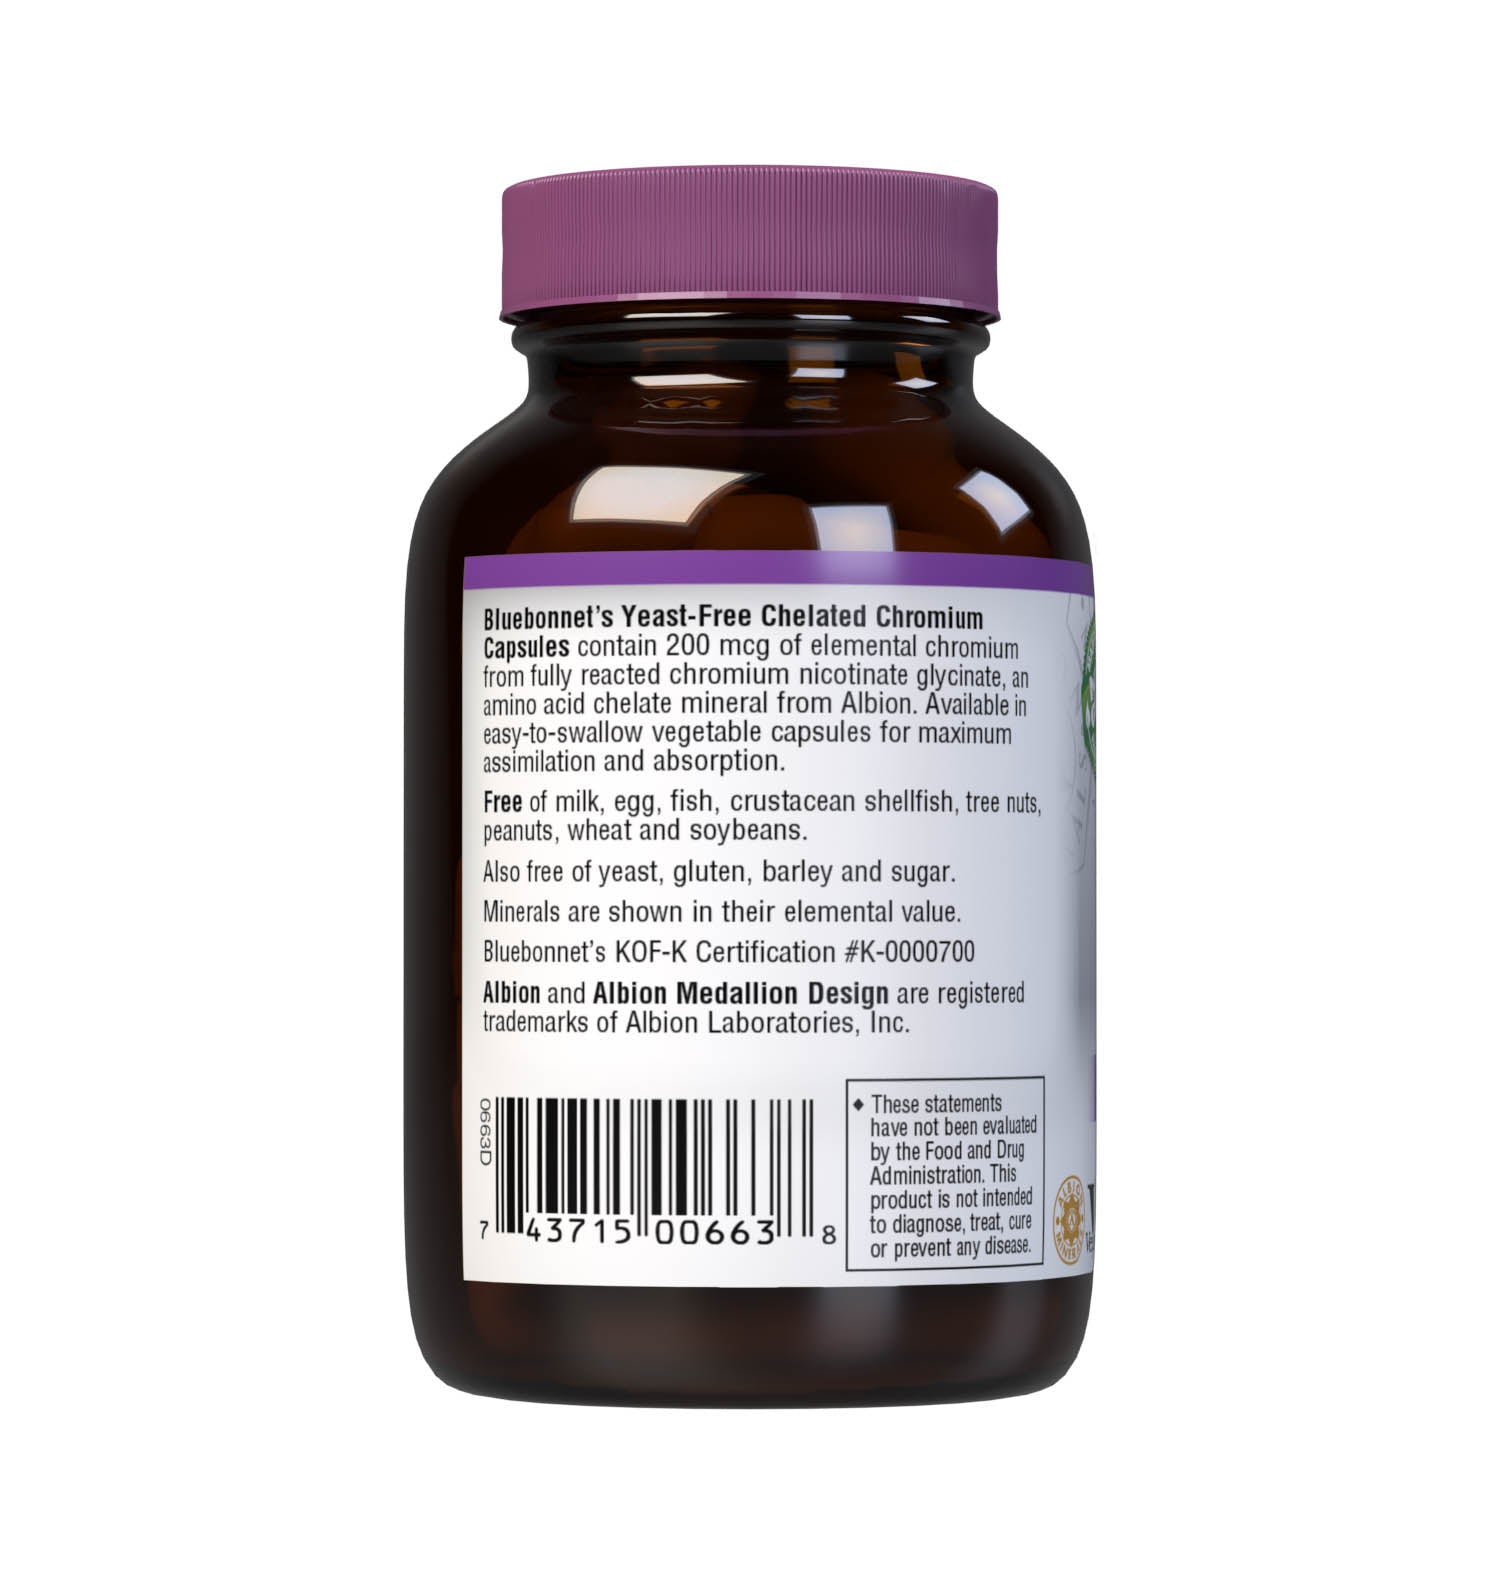 Bluebonnet's Yeast-Free Chelated Chromium 90 Vegetable Capsules are formulated with  200 mcg of elemental chromium from fully reacted chromium nicotinate glycinate, an amino acid chelate mineral from Albion. Chromium is an essential element that is necessary for blood sugar control and carbohydrate metabolism. Description panel. #size_90 count